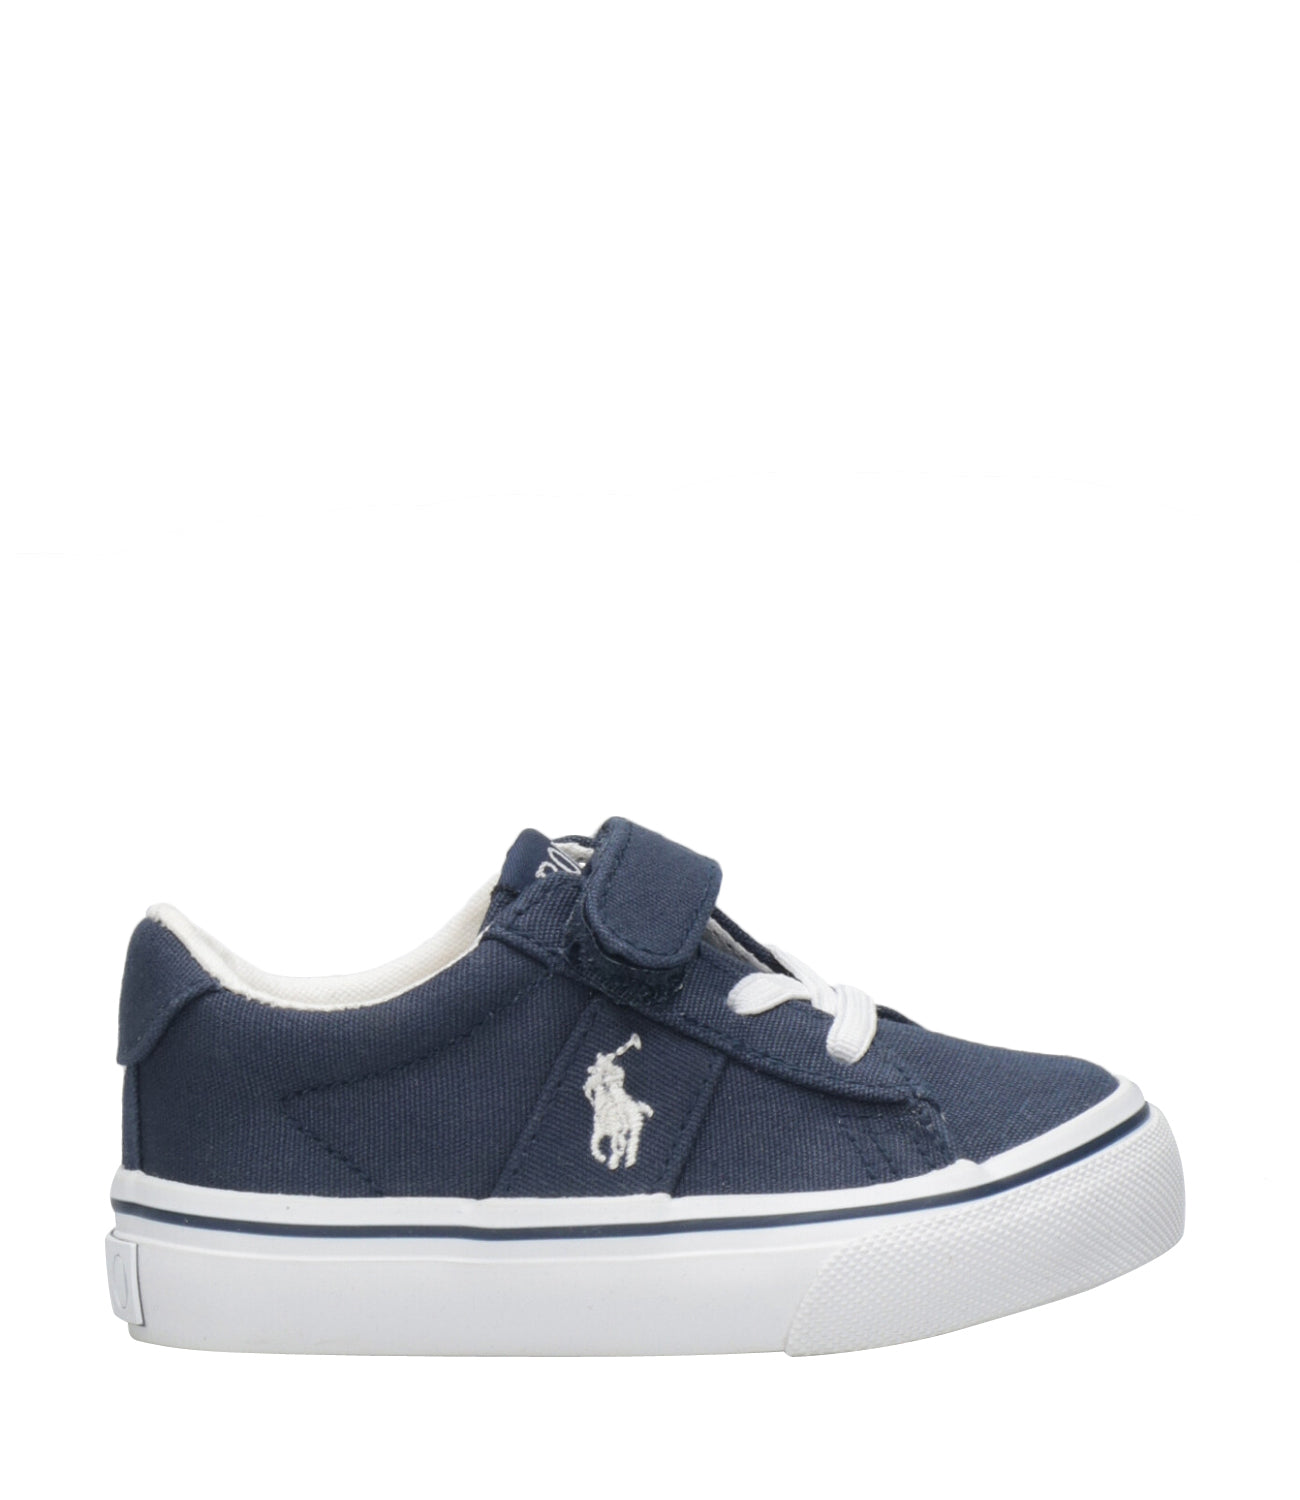 Ralph Lauren Childrenswear | Sneakers Sayer PS Navy Blue and White